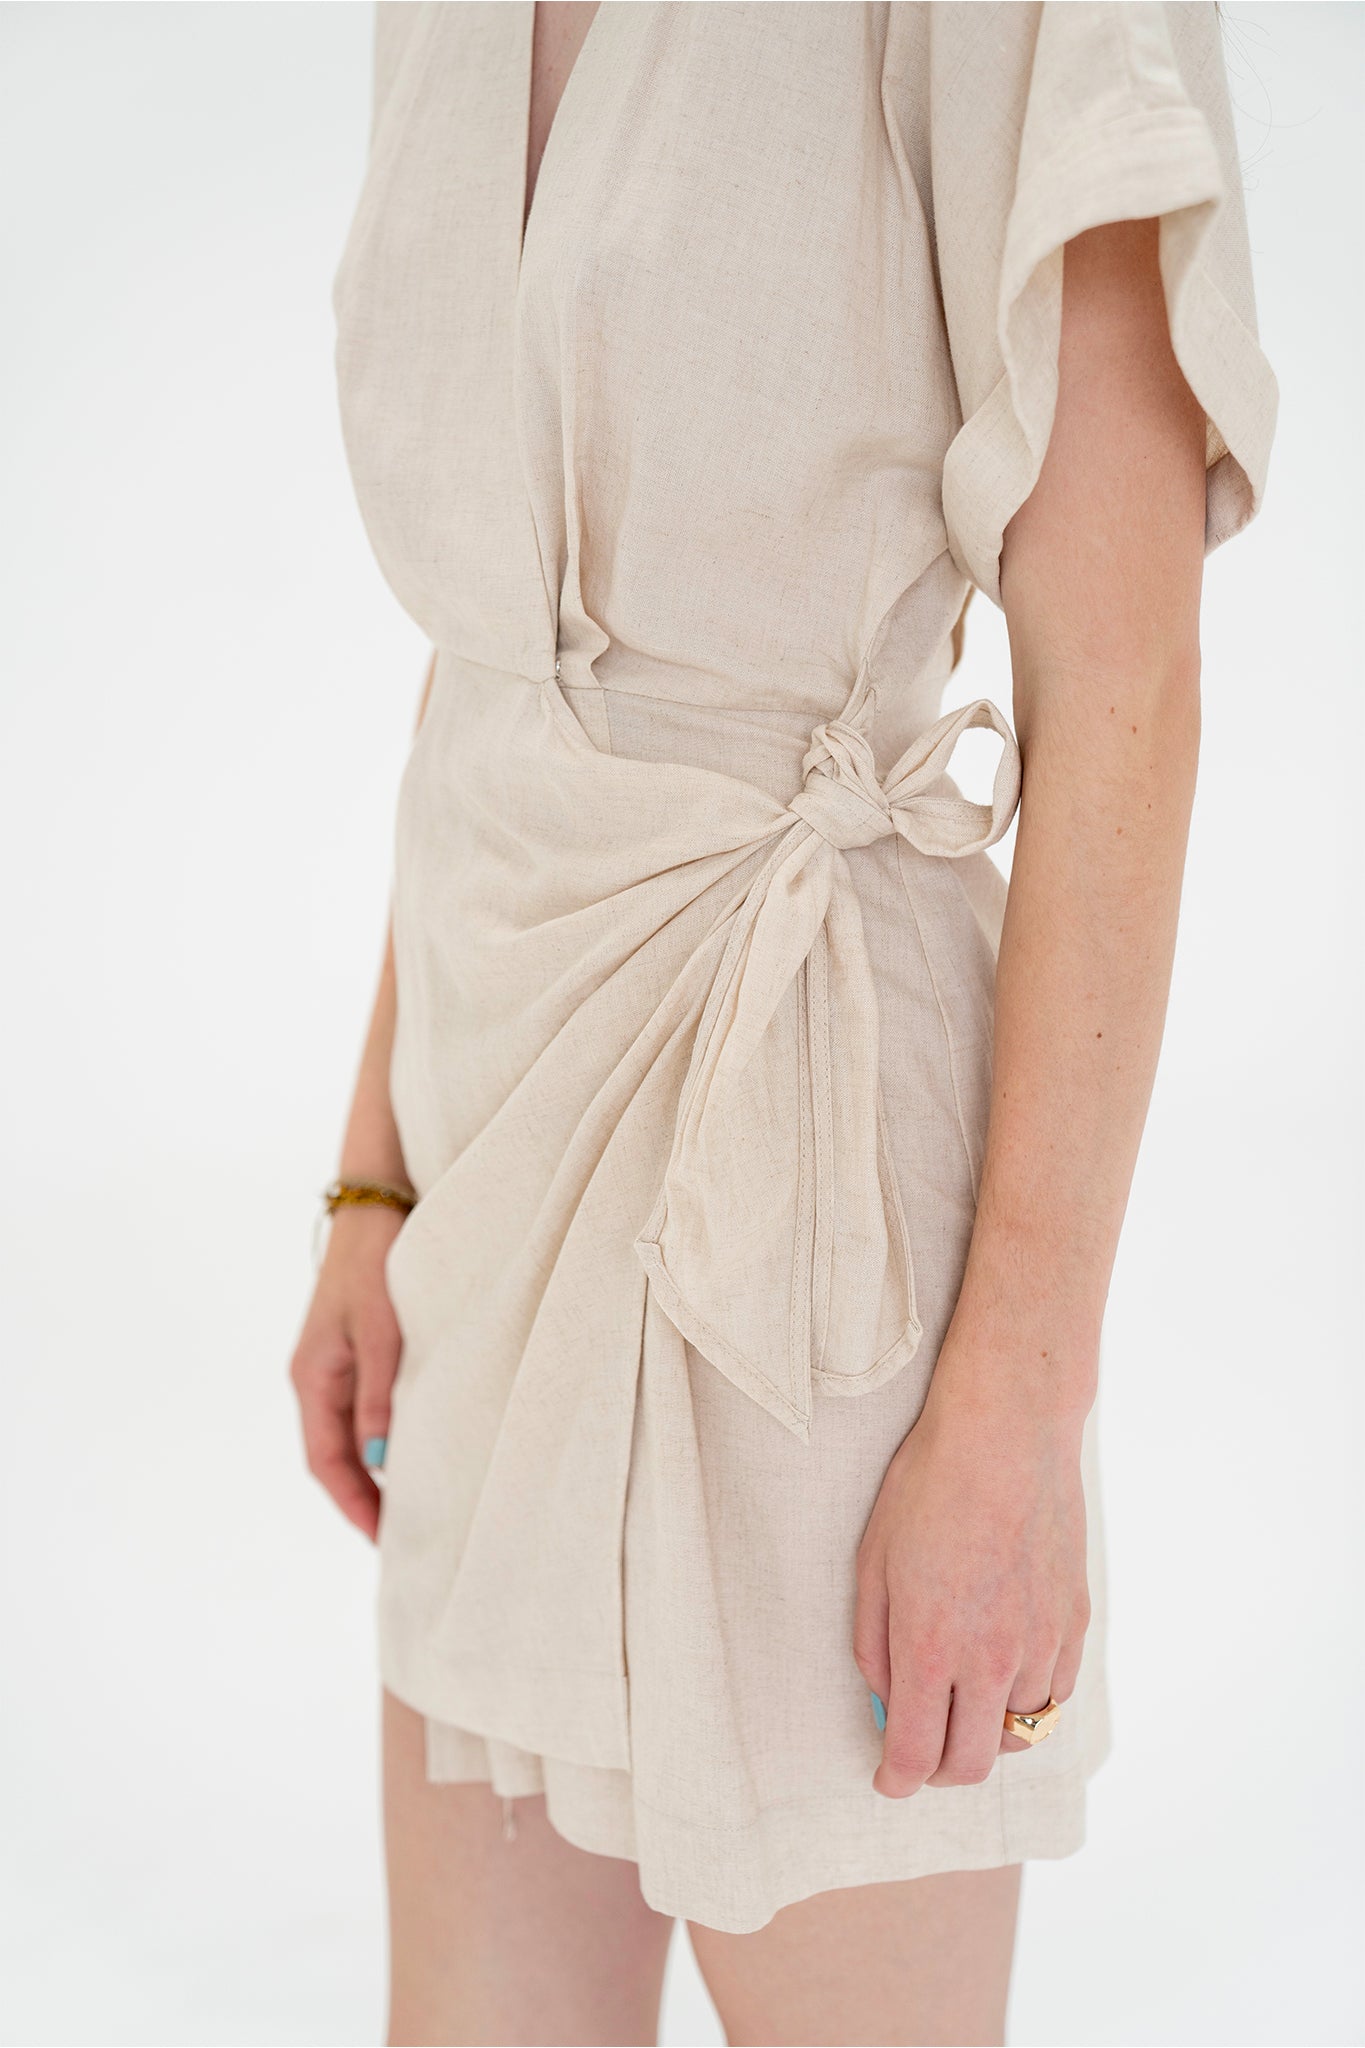 View 4 of Hein Wrap Dress, a Dresses from Larrea Cove. Detail: .